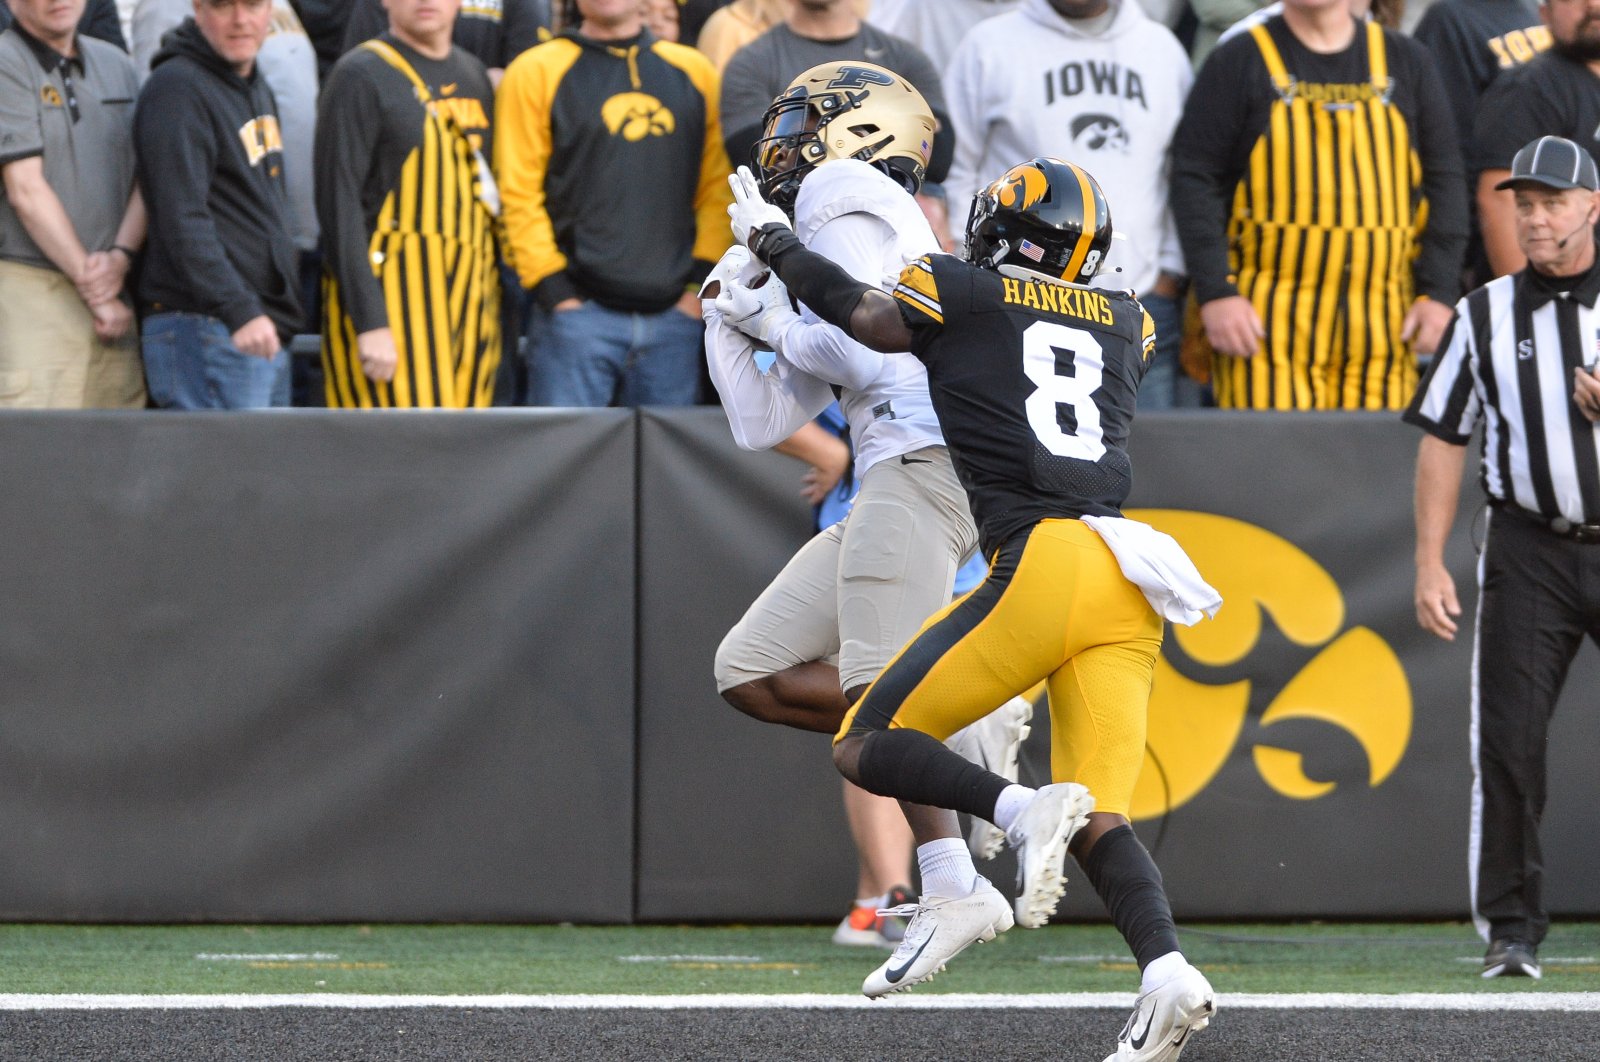 Purdue Boilermakers wide receiver David Bell (3) catches a 21 yard touchdown pass against Iowa Hawkeyes defensive back Matt Hankins (8) during the fourth quarter at Kinnick Stadium, Iowa City, Iowa, U.S., Oct. 16, 2021. (Jeffrey Becker-USA TODAY Sports via Reuters)